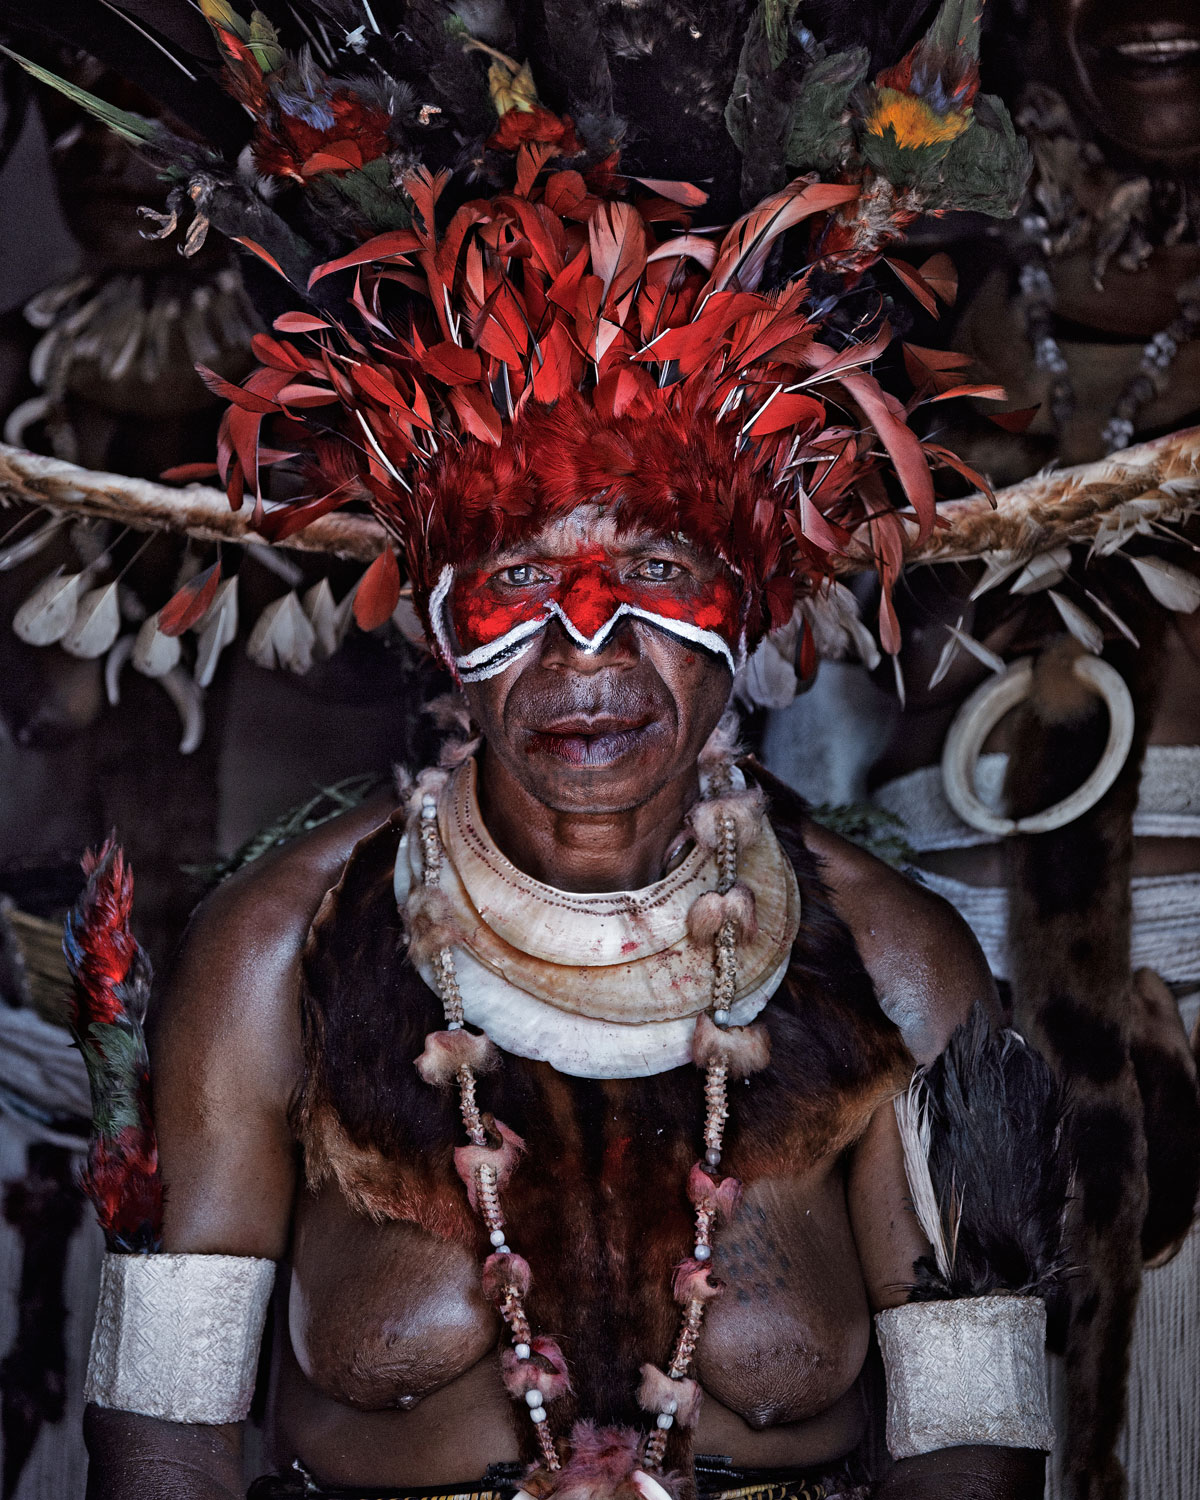 NELS120801-TRIBES-PAPUA-NEW-GUINEA-027